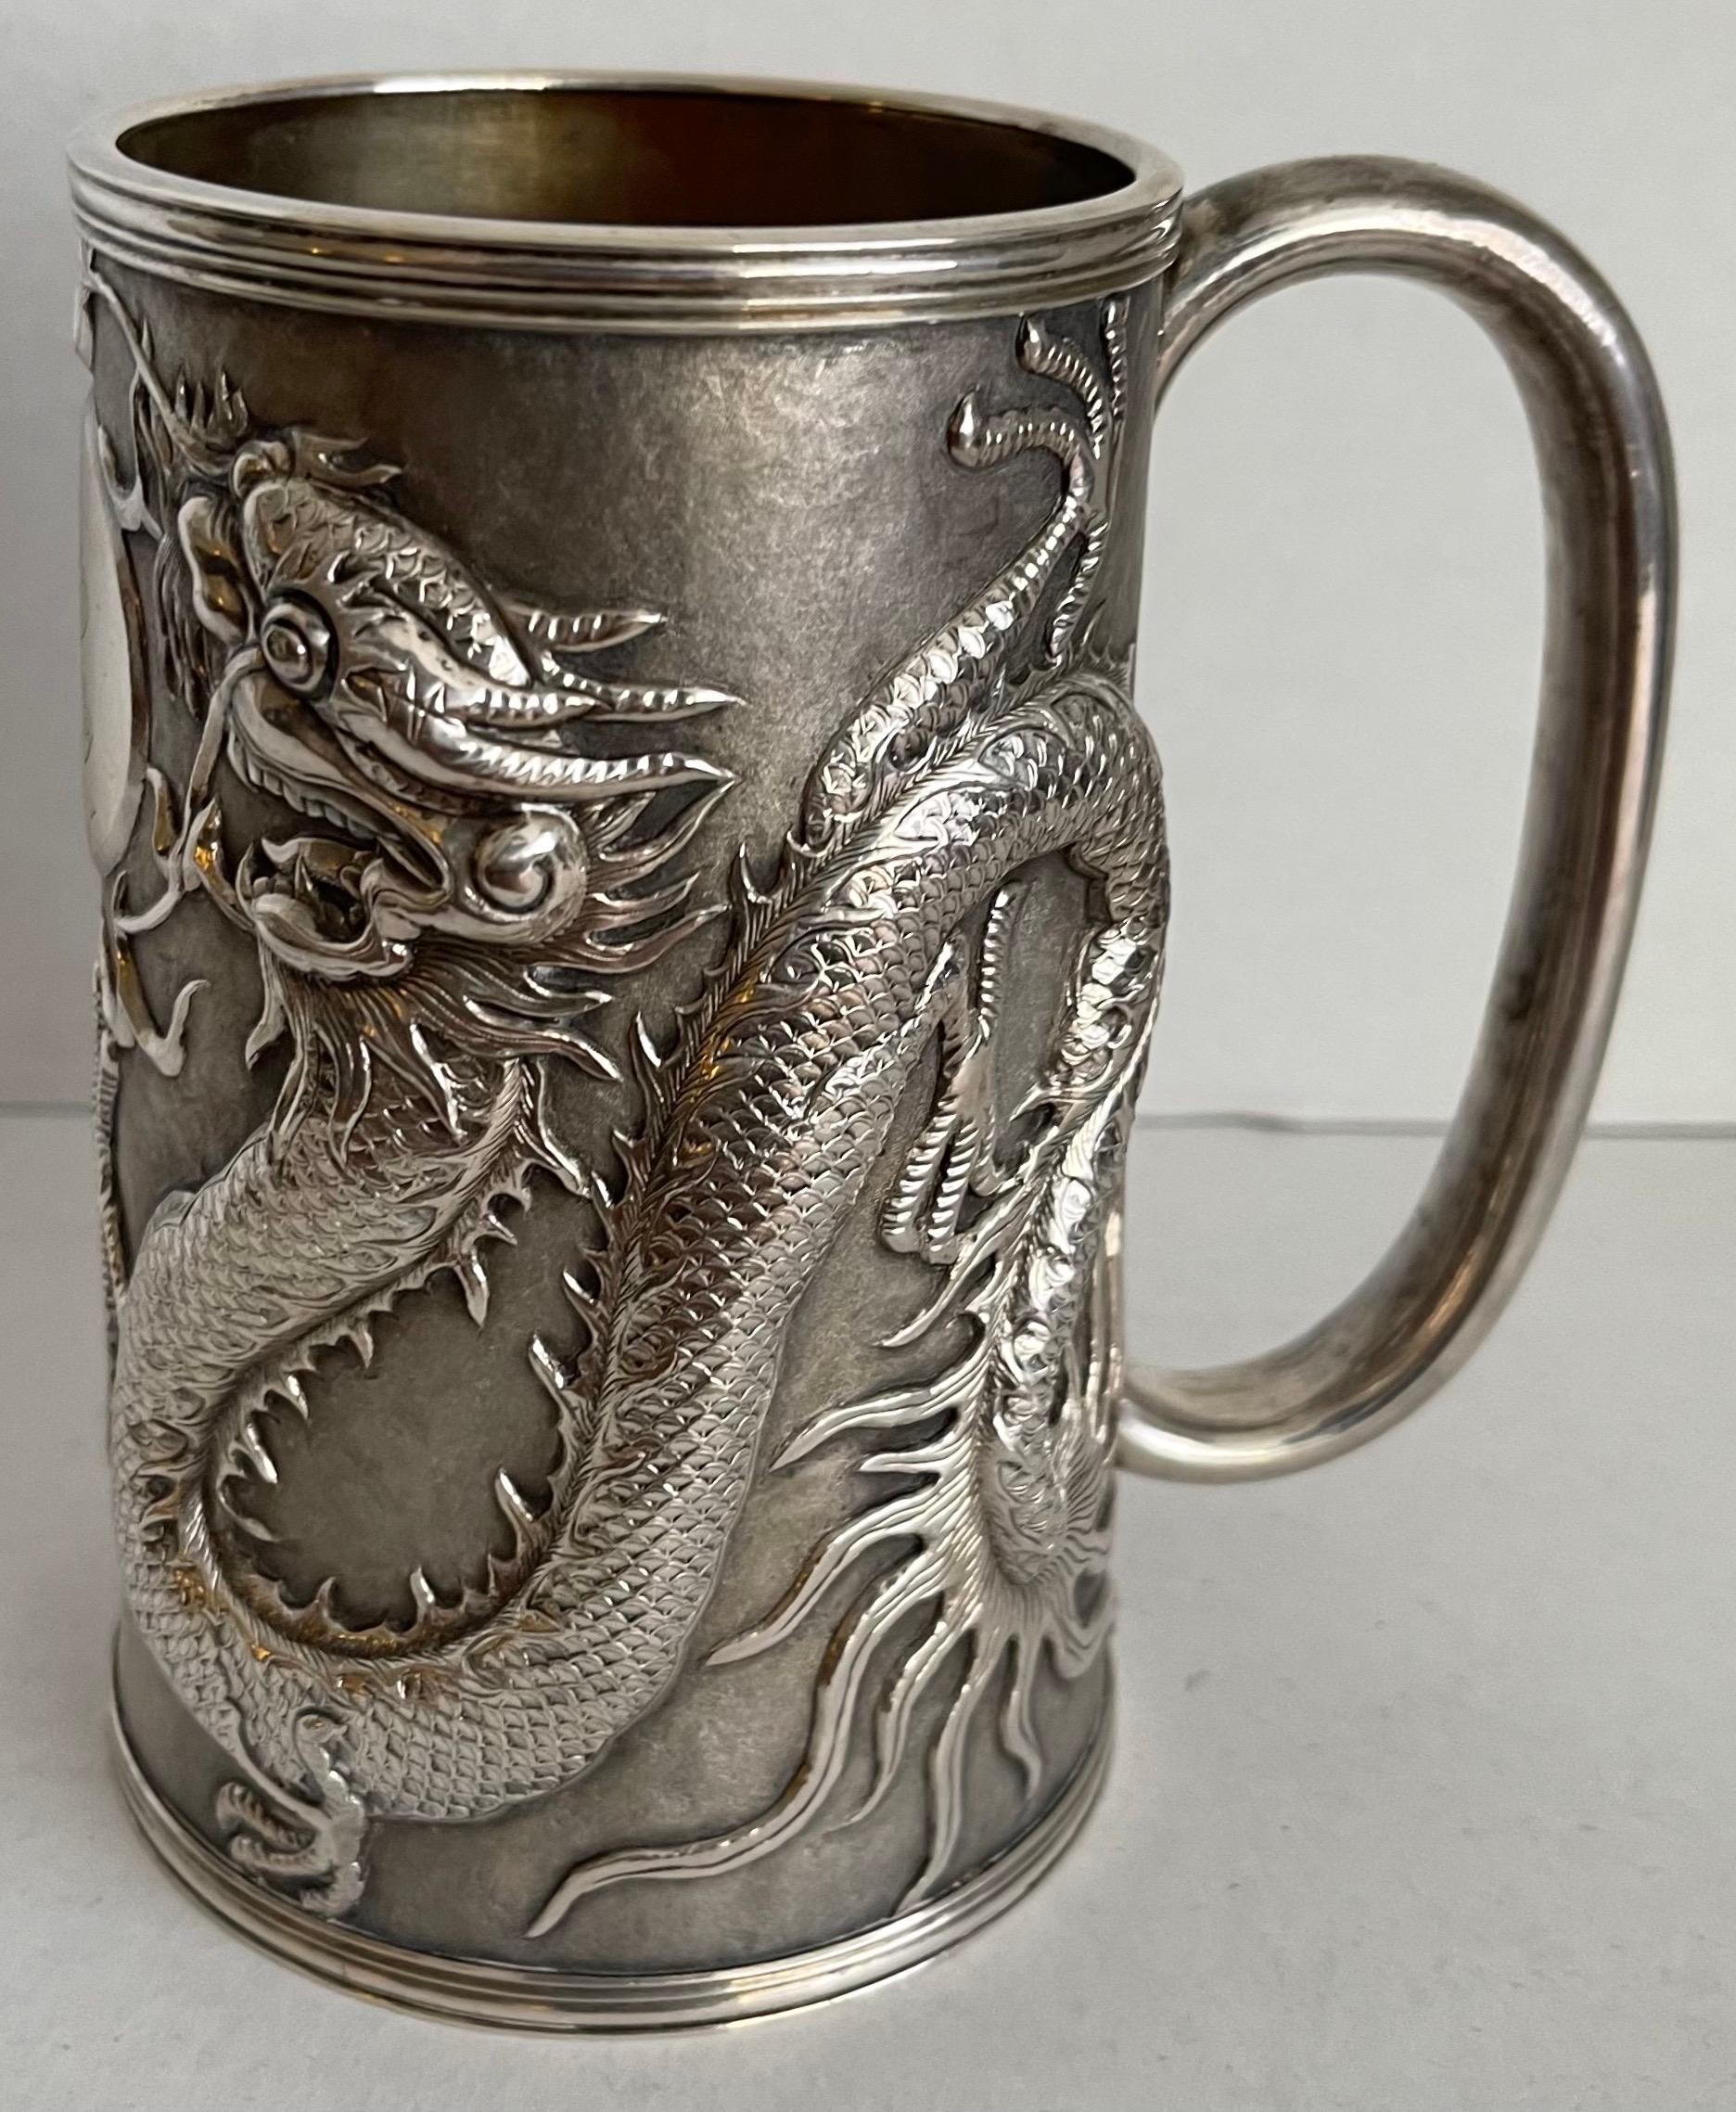 Chinese export 1840s silver dragon tankard. Featuring two bold well defined dragons with central pearl of wisdom design. Solid weighty construction. Center monogram. 
Makers mark on the underside GM (Gem Wo workshop).